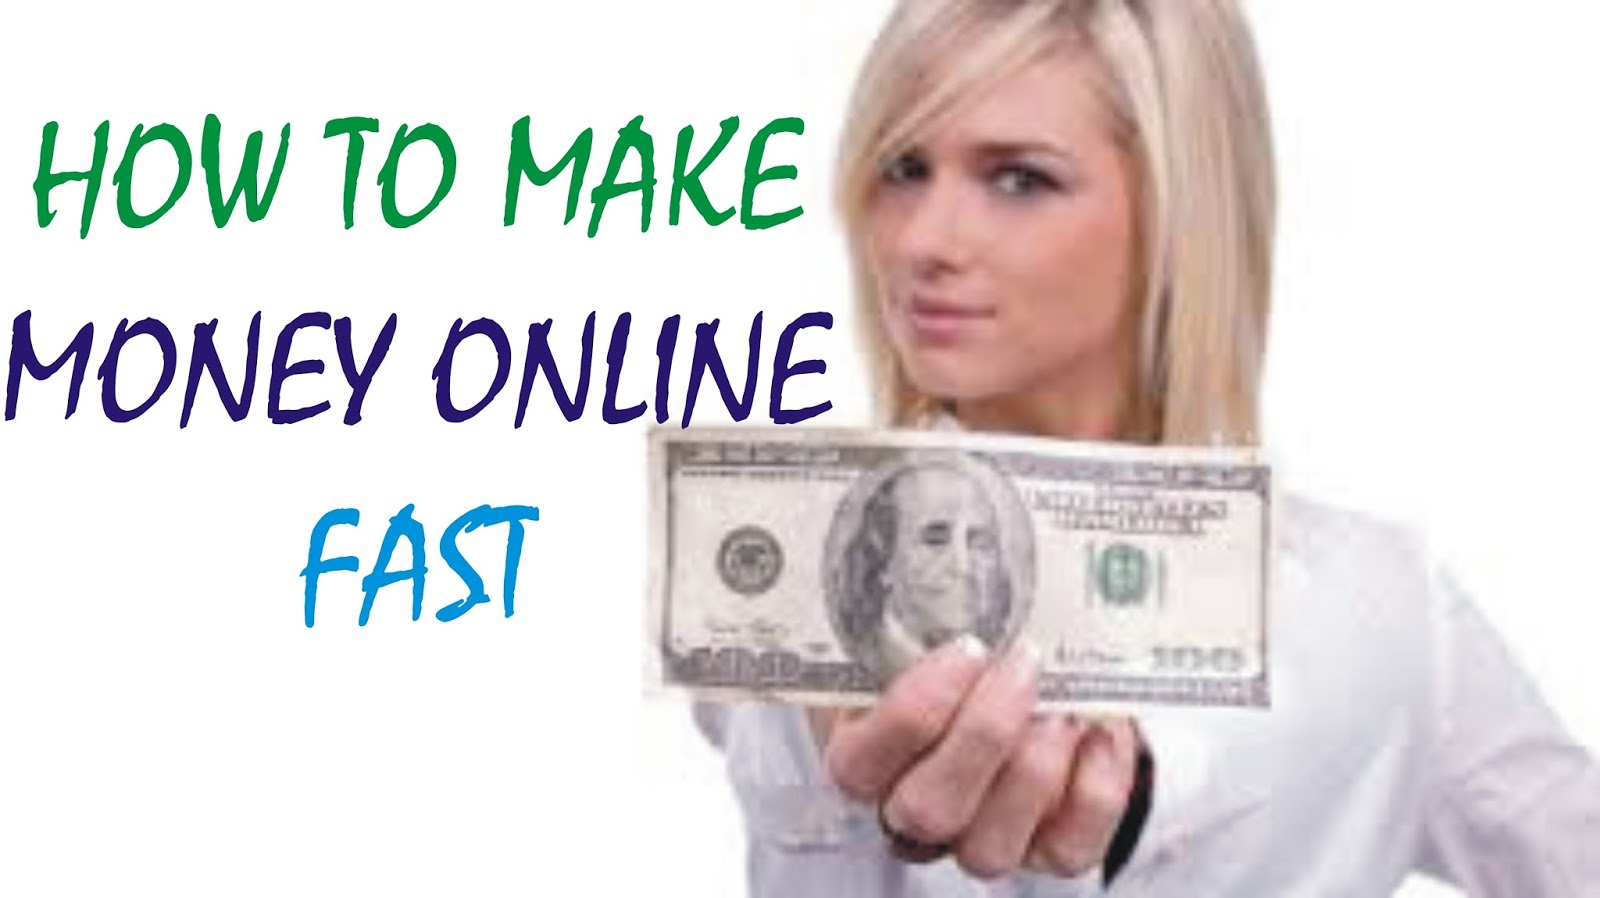 Top 10 Ways to Make Money on the Internet